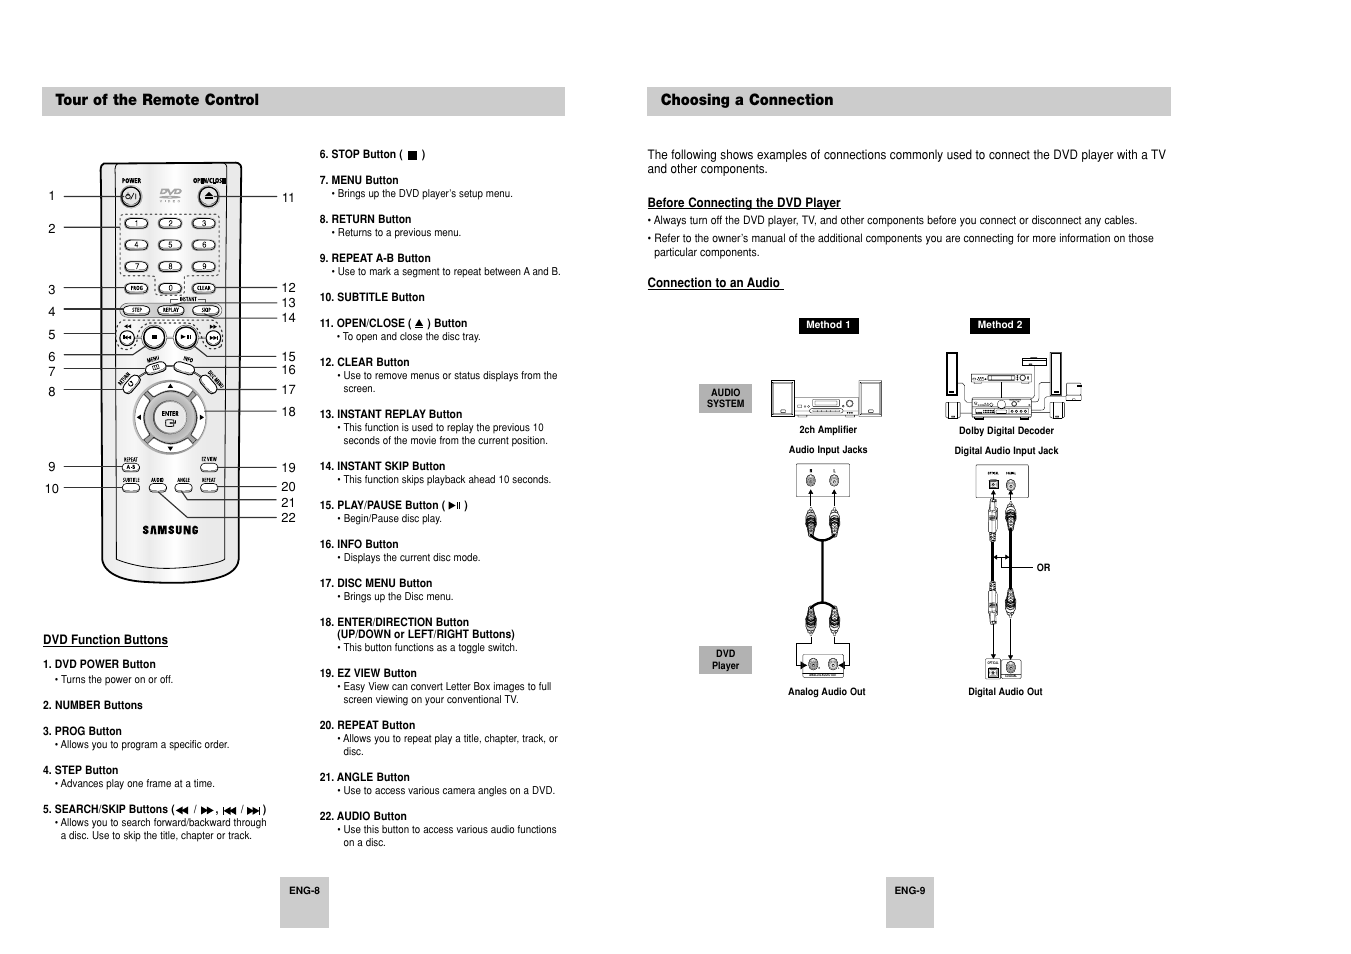 Tour of the remote control, Choosing a connection | Samsung DVD-P248A User Manual | Page 5 / 16